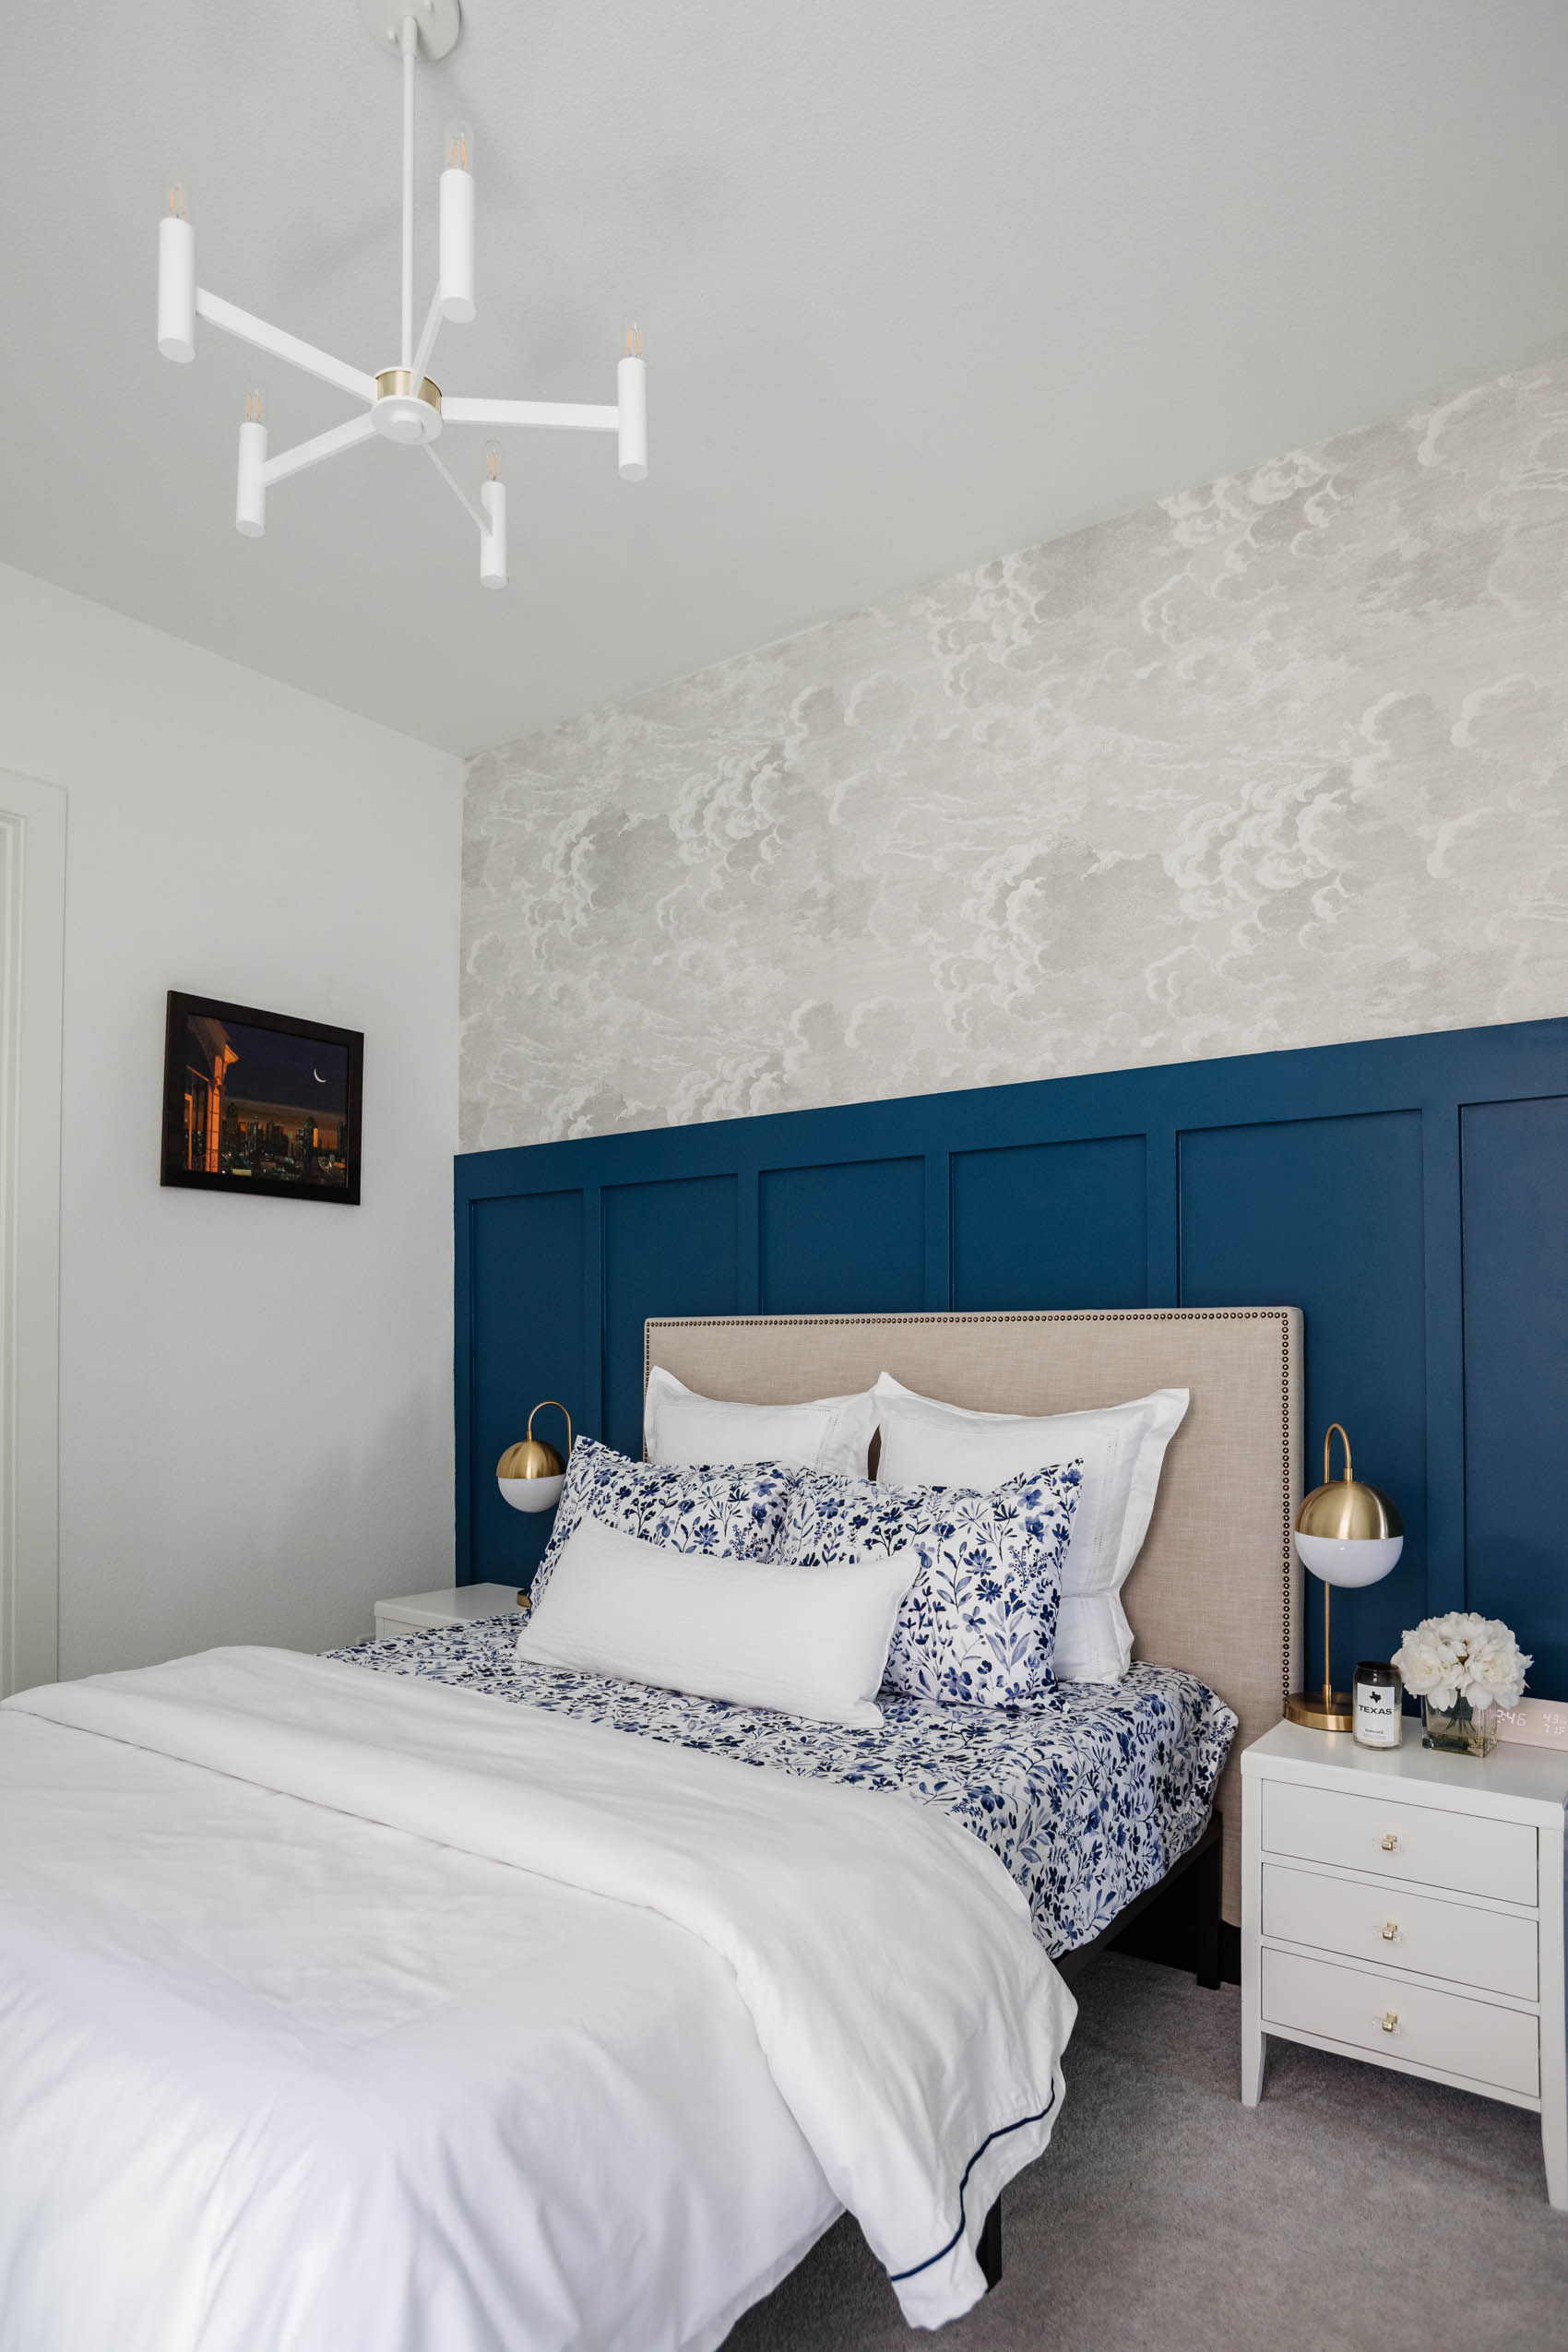 Guest room ideas with board and batten in PPG Chinese Porcelain with Cole & Son nuvolette wallpaper, west elm upholstered headboard, boll & branch botanical print bedsheets, white nightstands and chandelier and brass table lamps